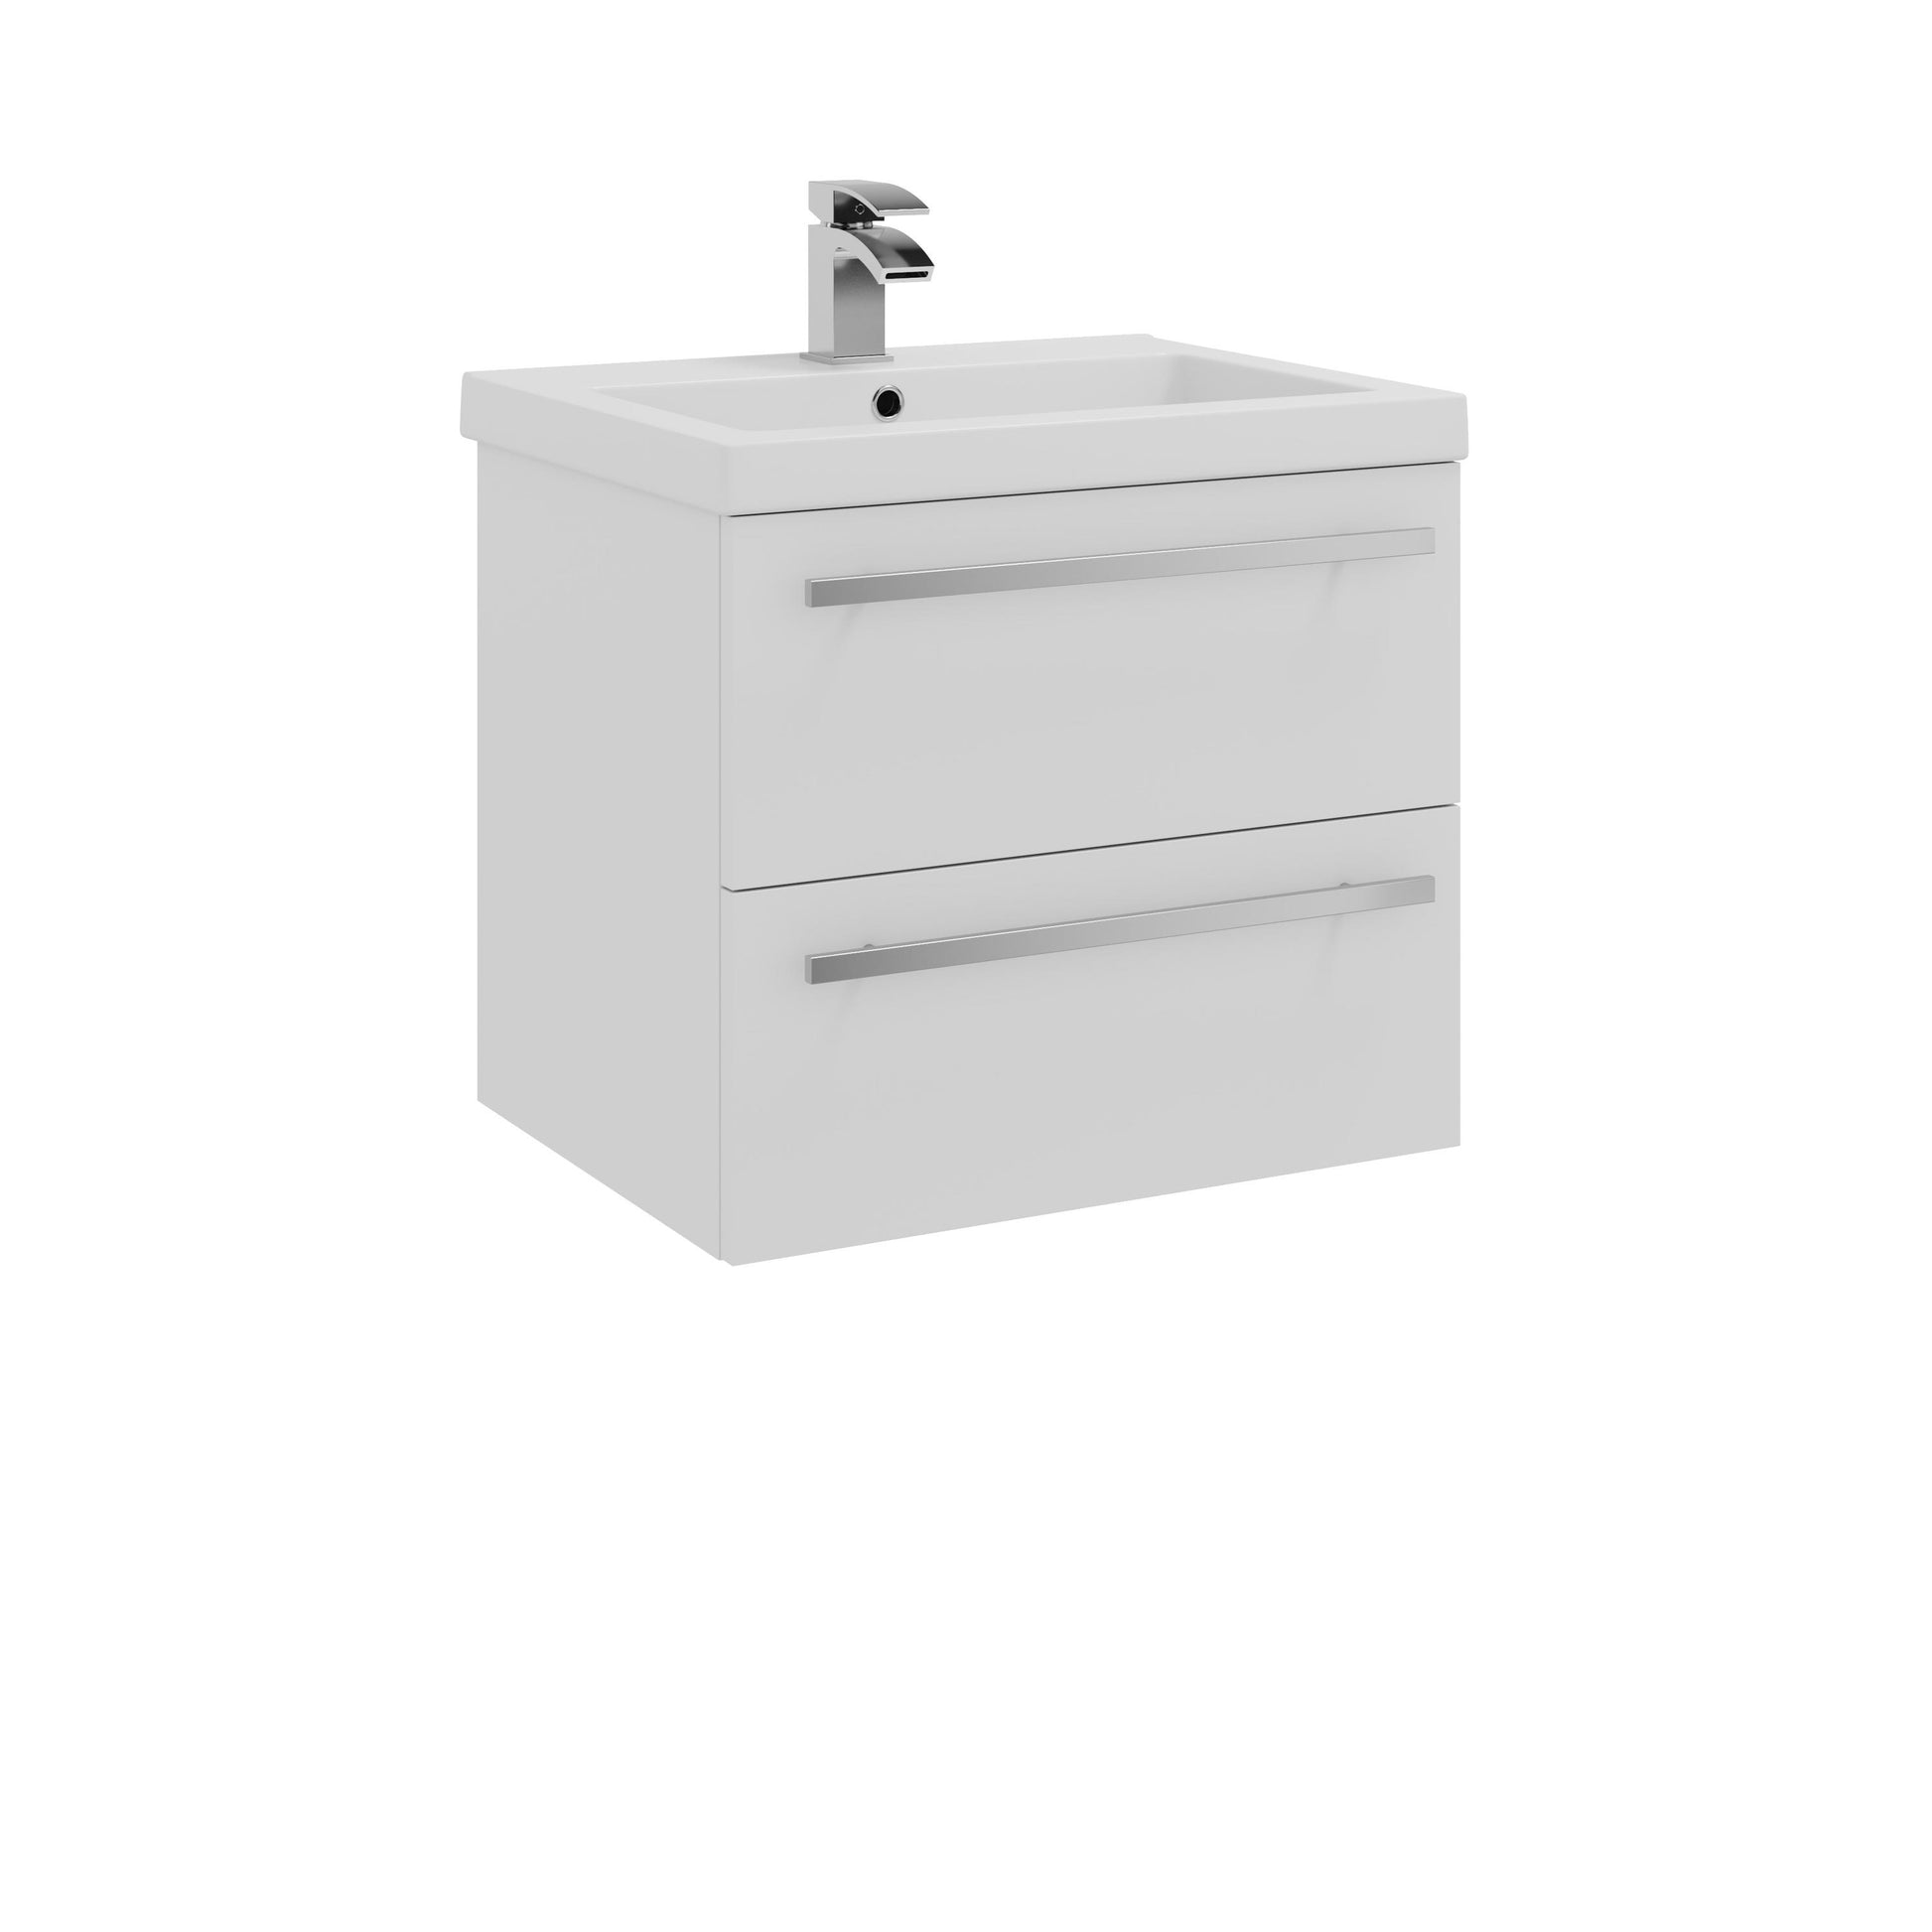 Purity 2 Drawer Unit & Mid Depth Ceramic Basin - Wall Mounted / 600mm Width / White Gloss - Purity - Bliss Bathroom Supplies Ltd -